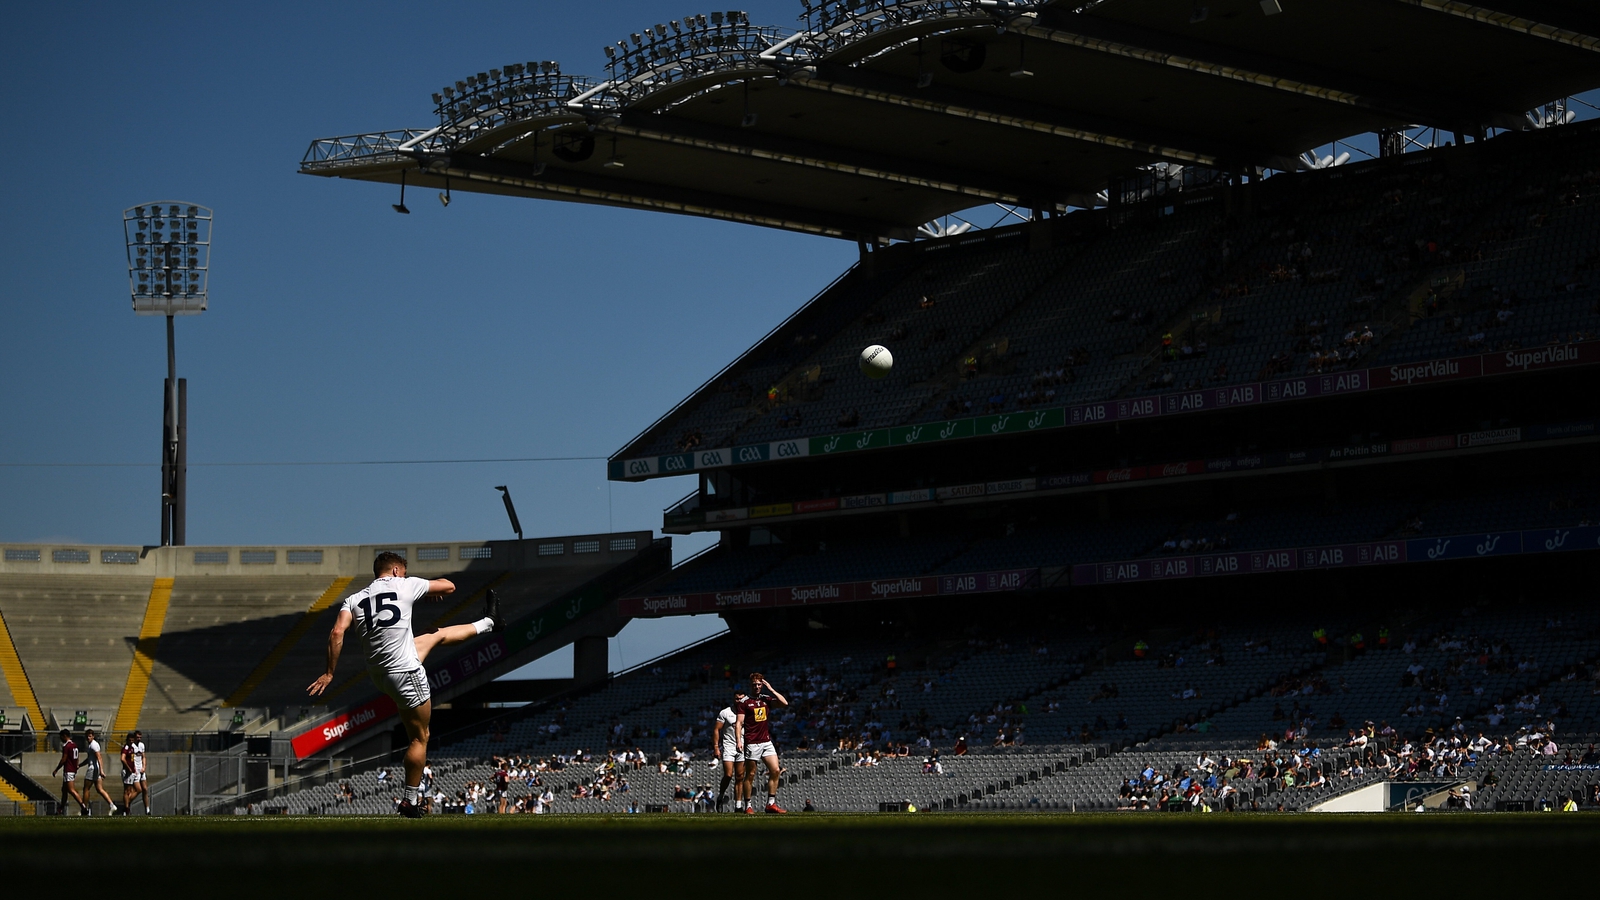 Attendance To Increase To 40 000 For All Ireland Finals